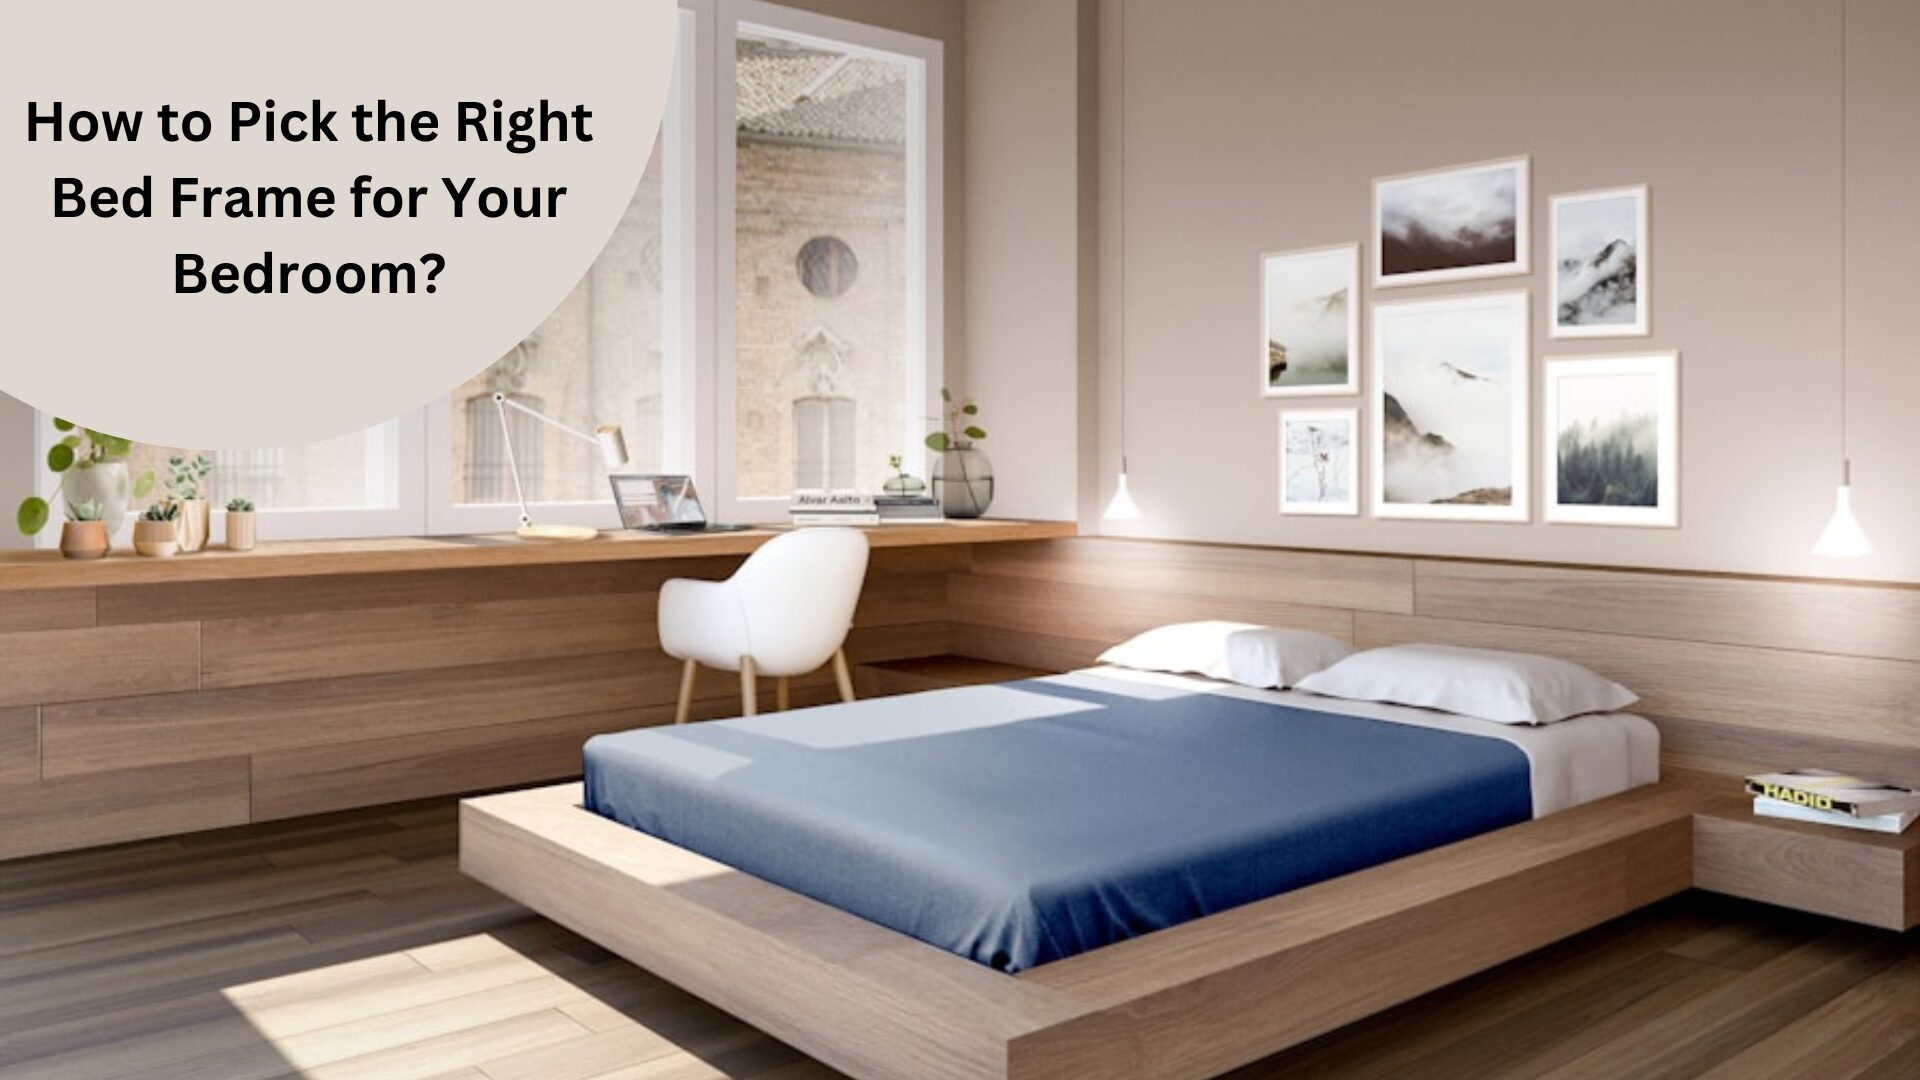 How to Pick the Right Bed Frame for Your Bedroom